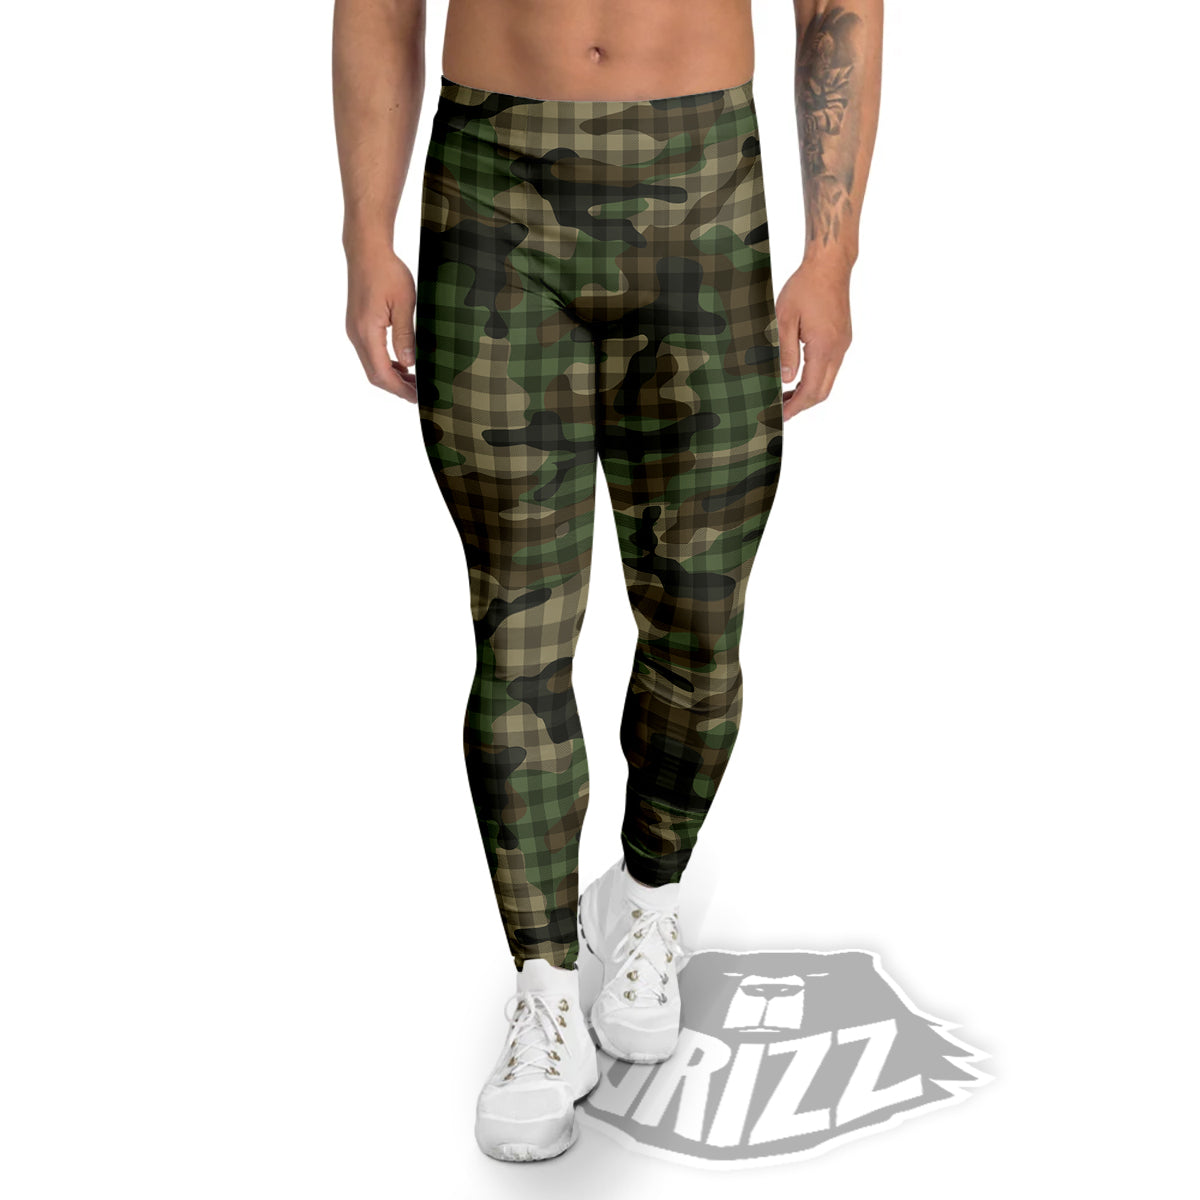 Green Army Camo Leggings for Men Military Camouflage Pattern Print